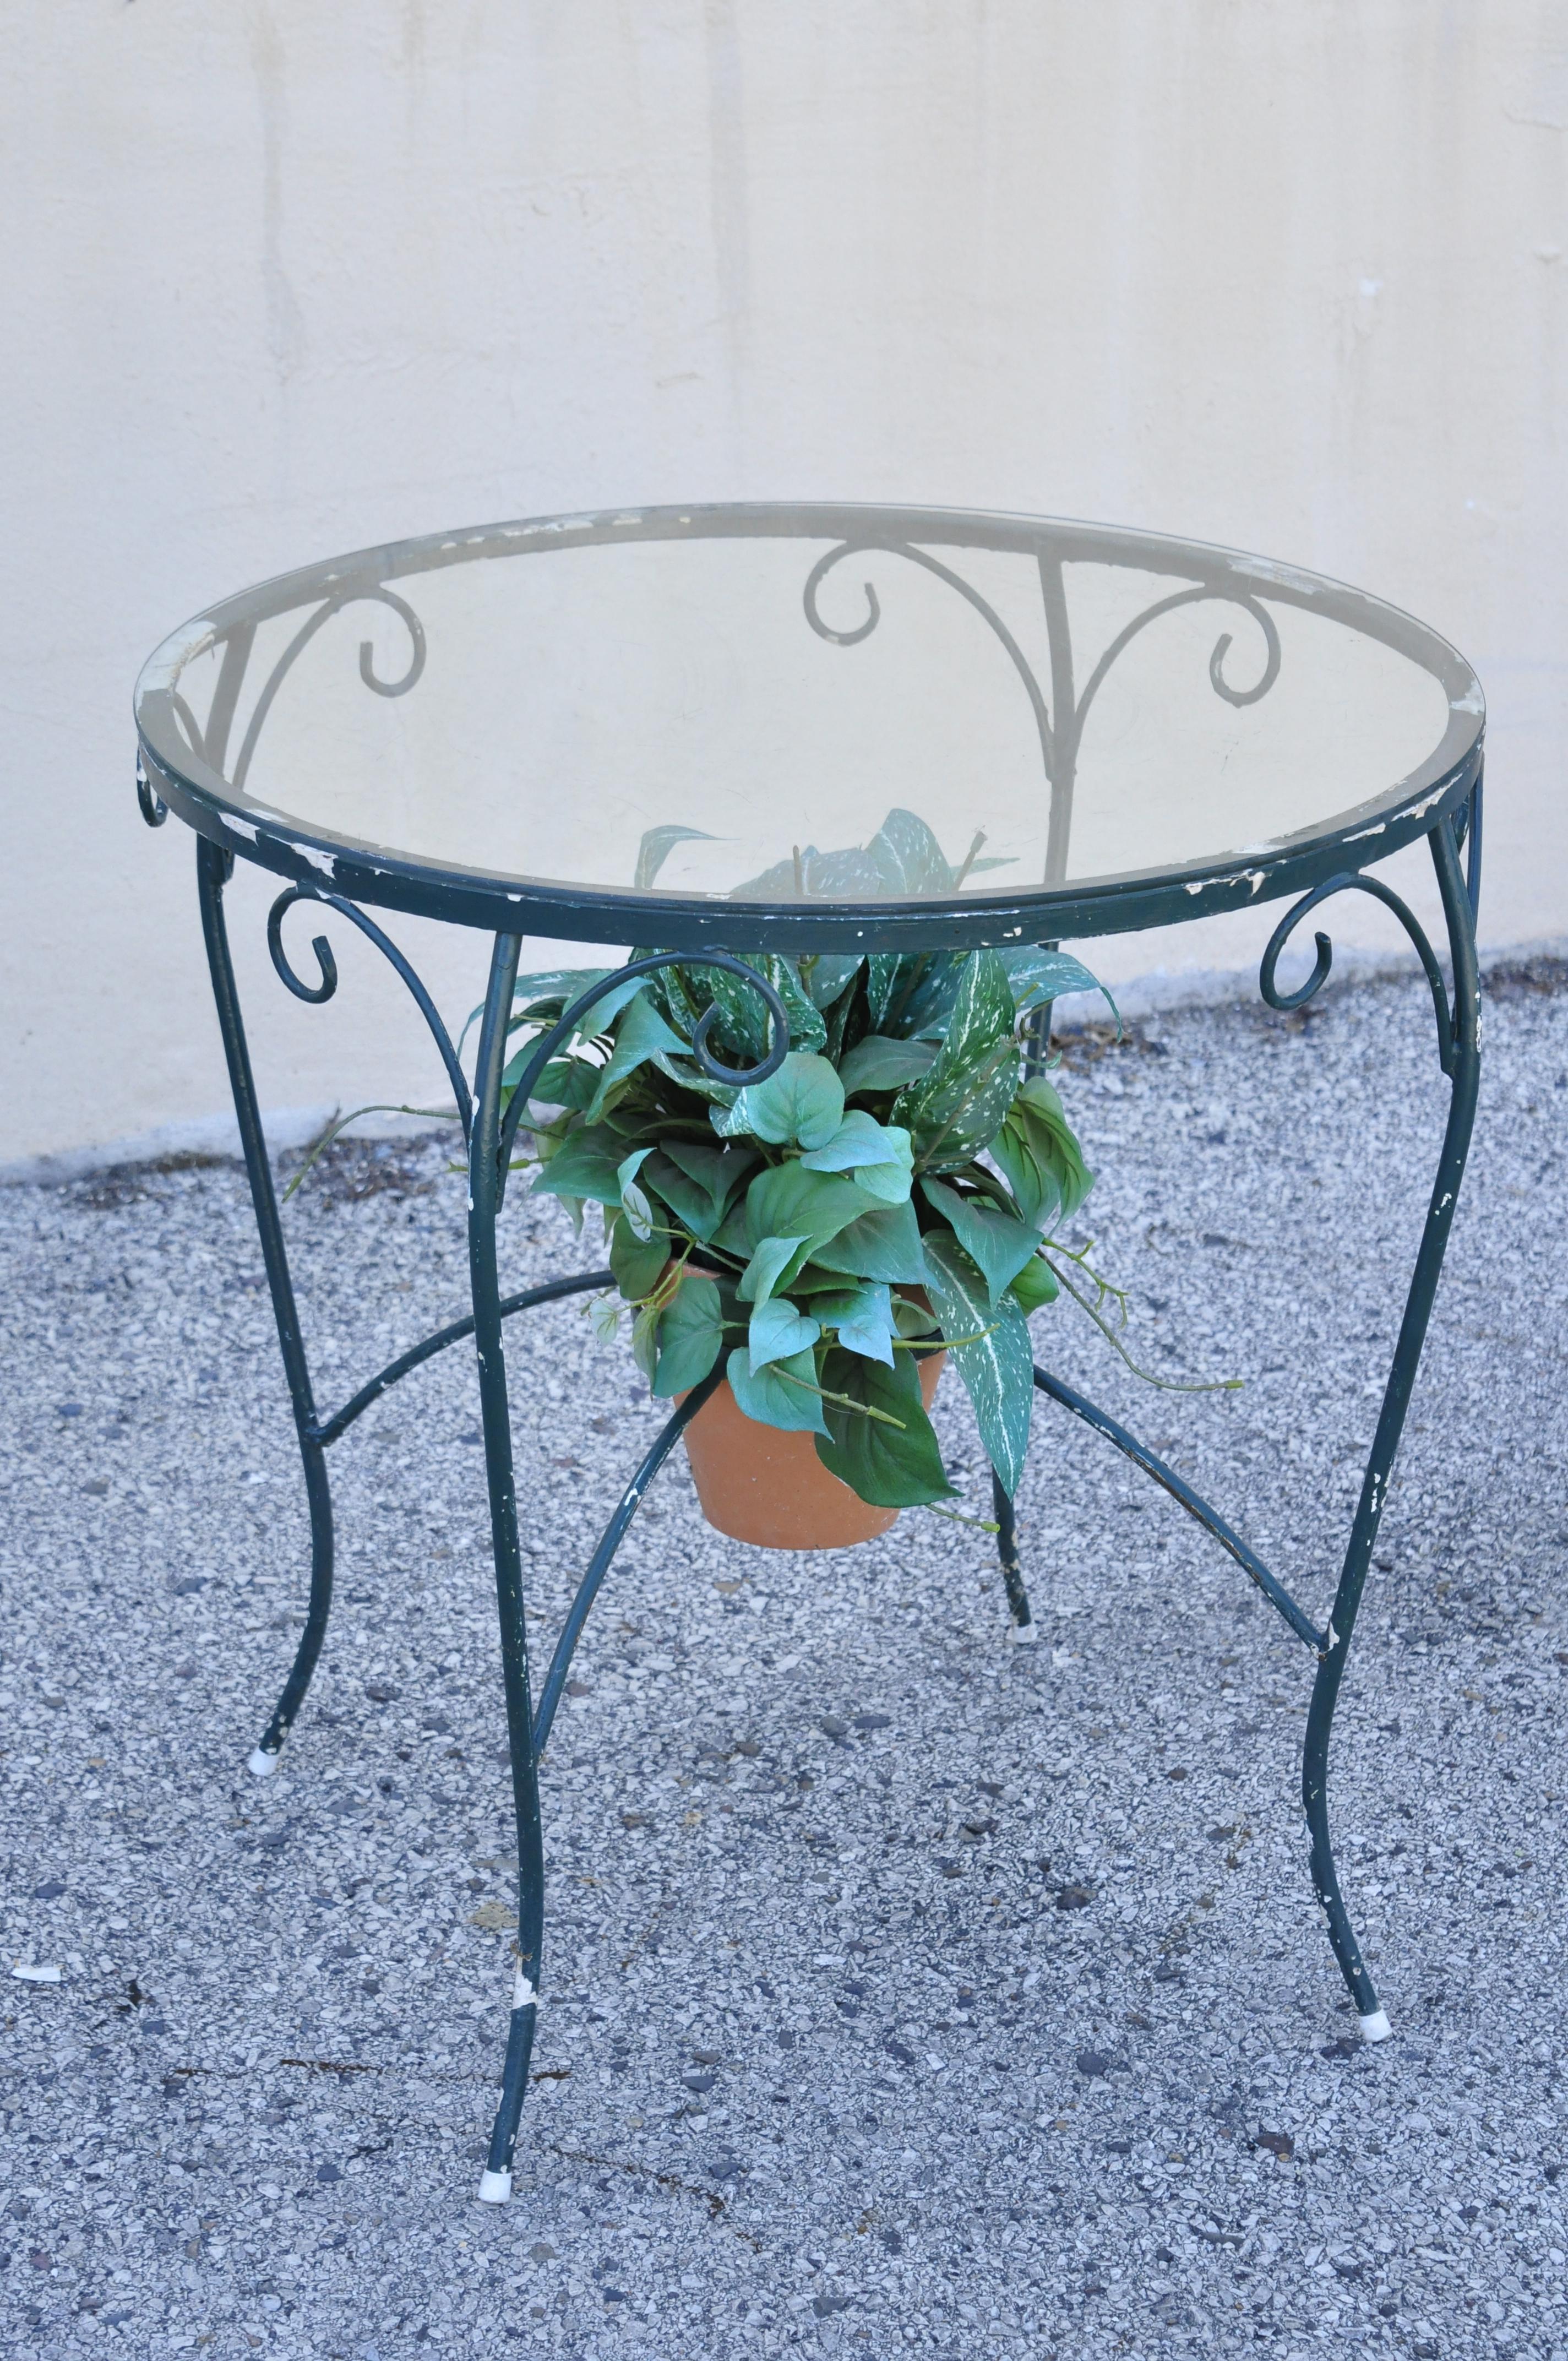 plantation patterns wrought iron table and chairs